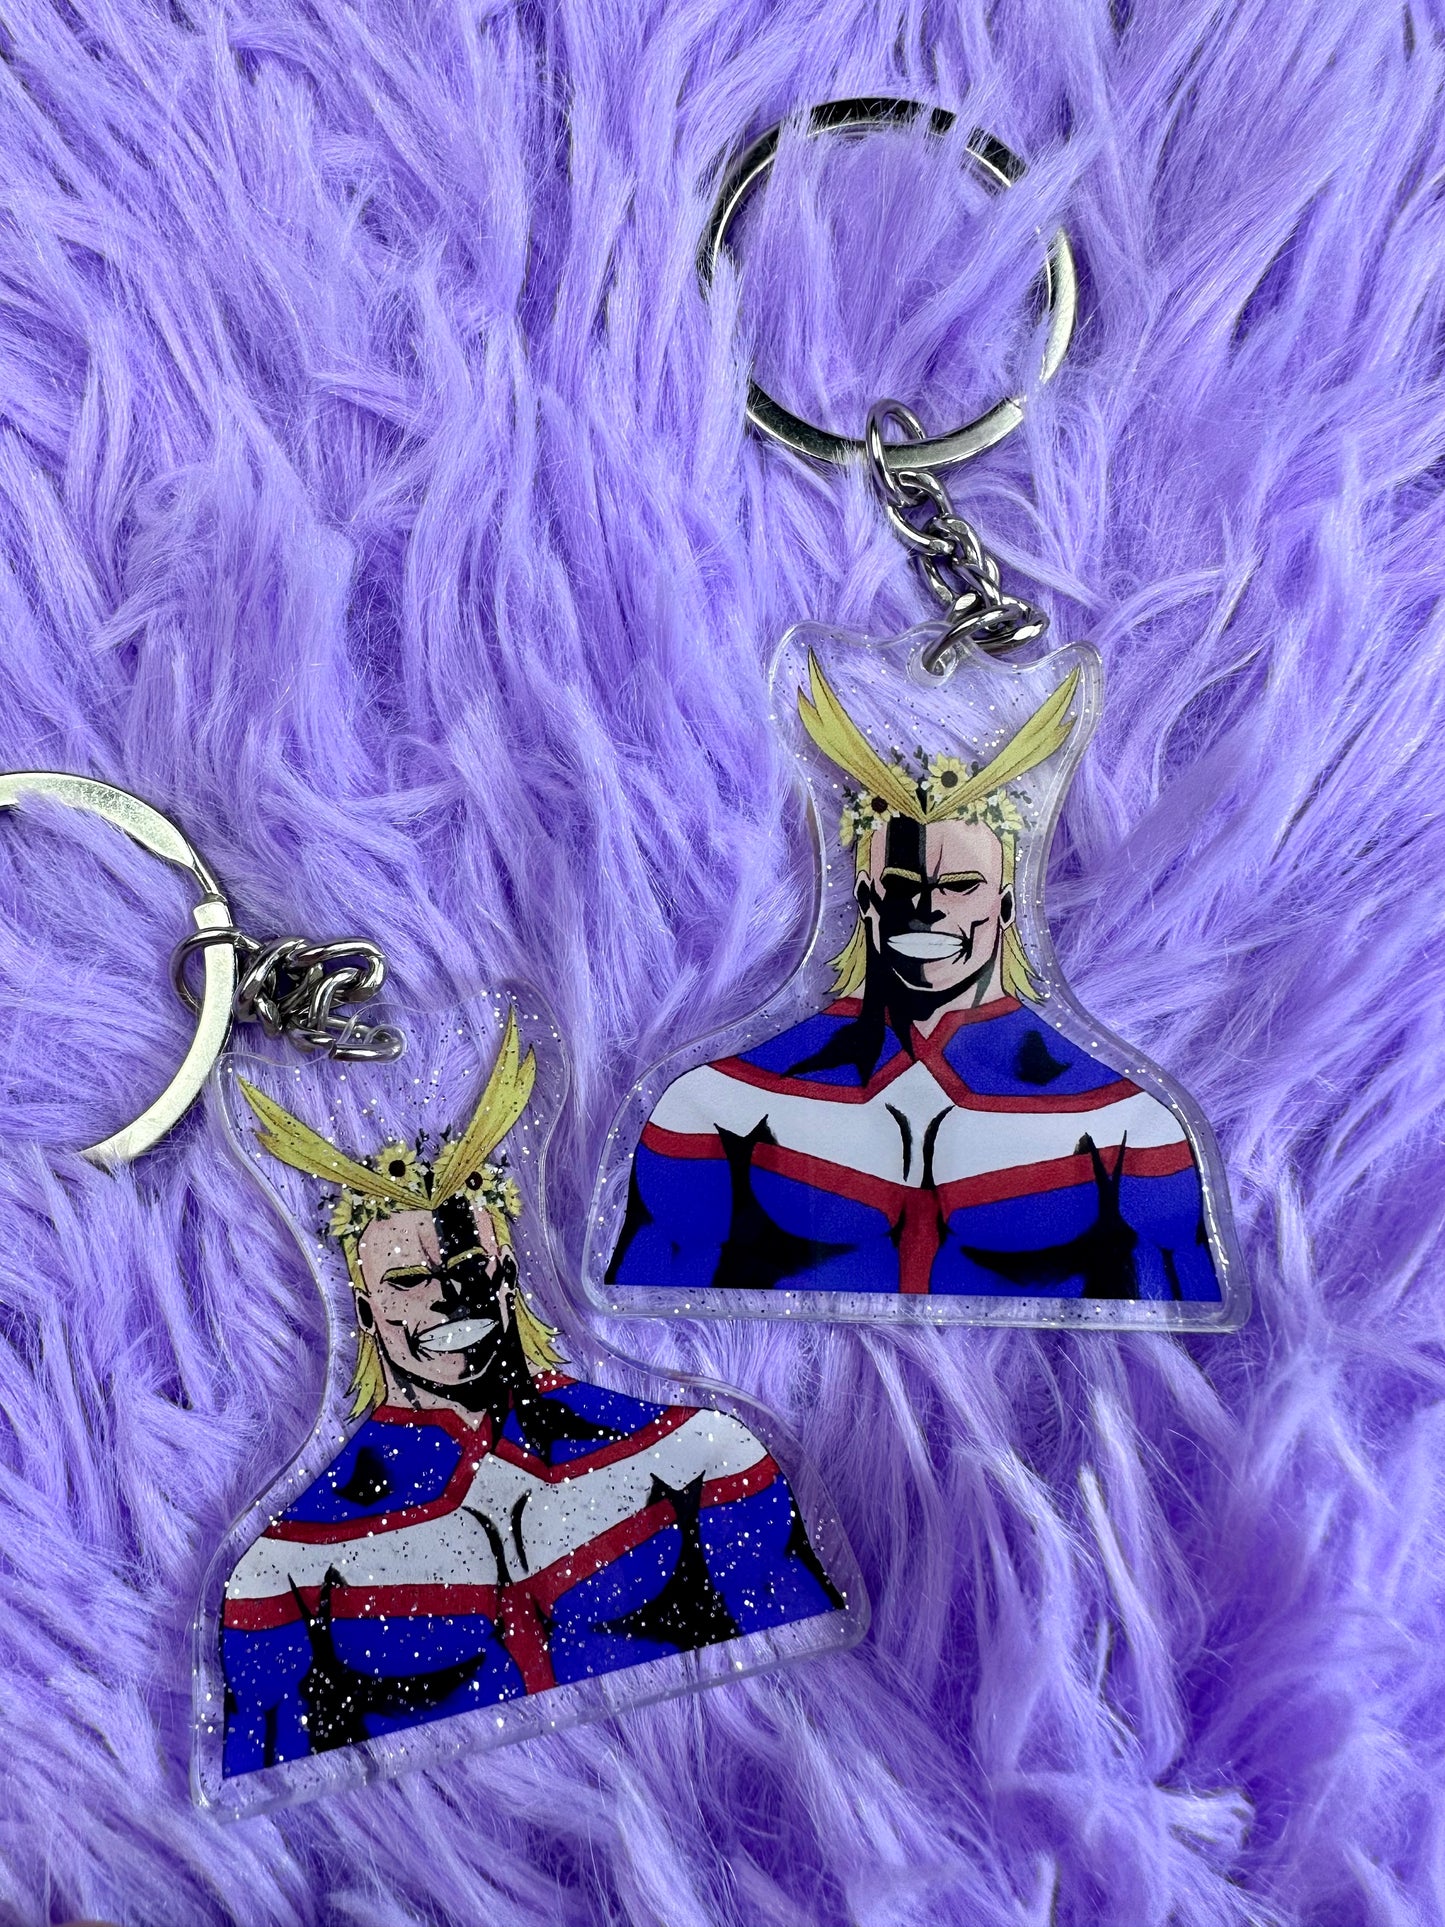 All Might Keychain